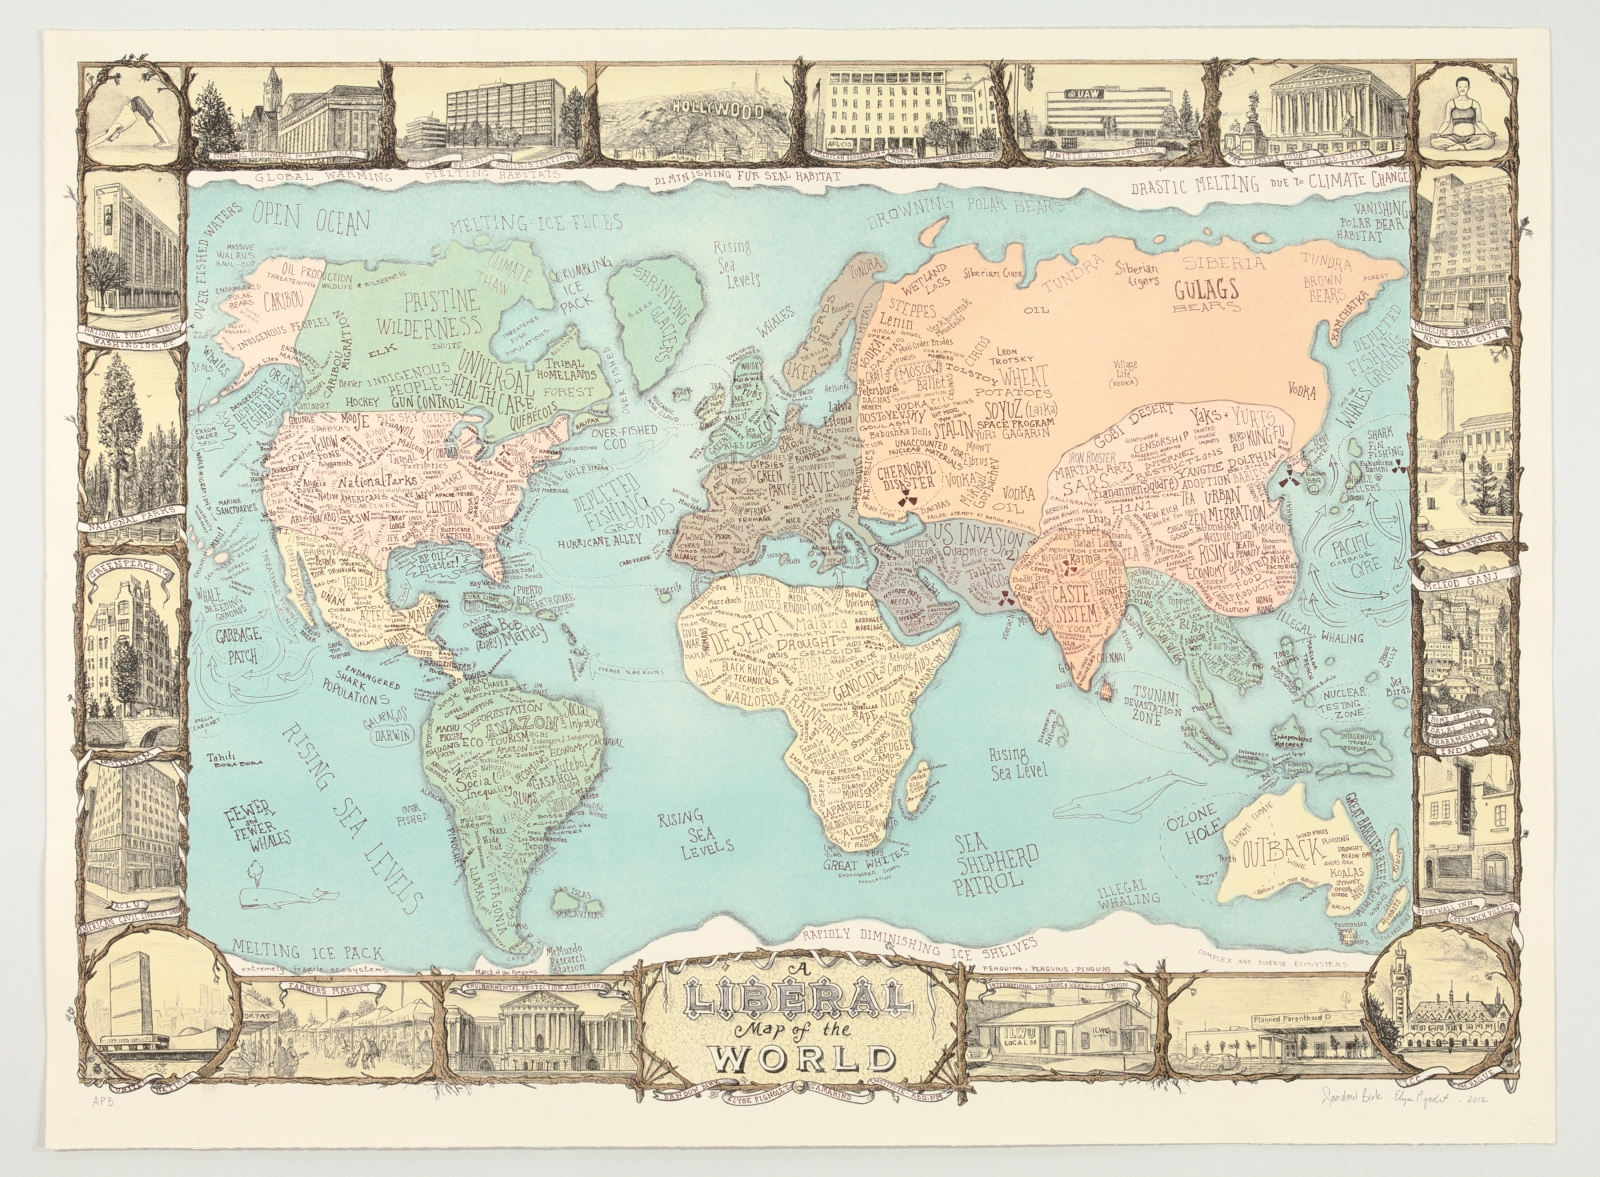 Sandow Birk and Elyse Pignolet
A Liberal Map of the World (collaboration with Elyse Pignolet), 2011
6 color lithograph
34 x 46 in.
86.36 x 116.84 cm